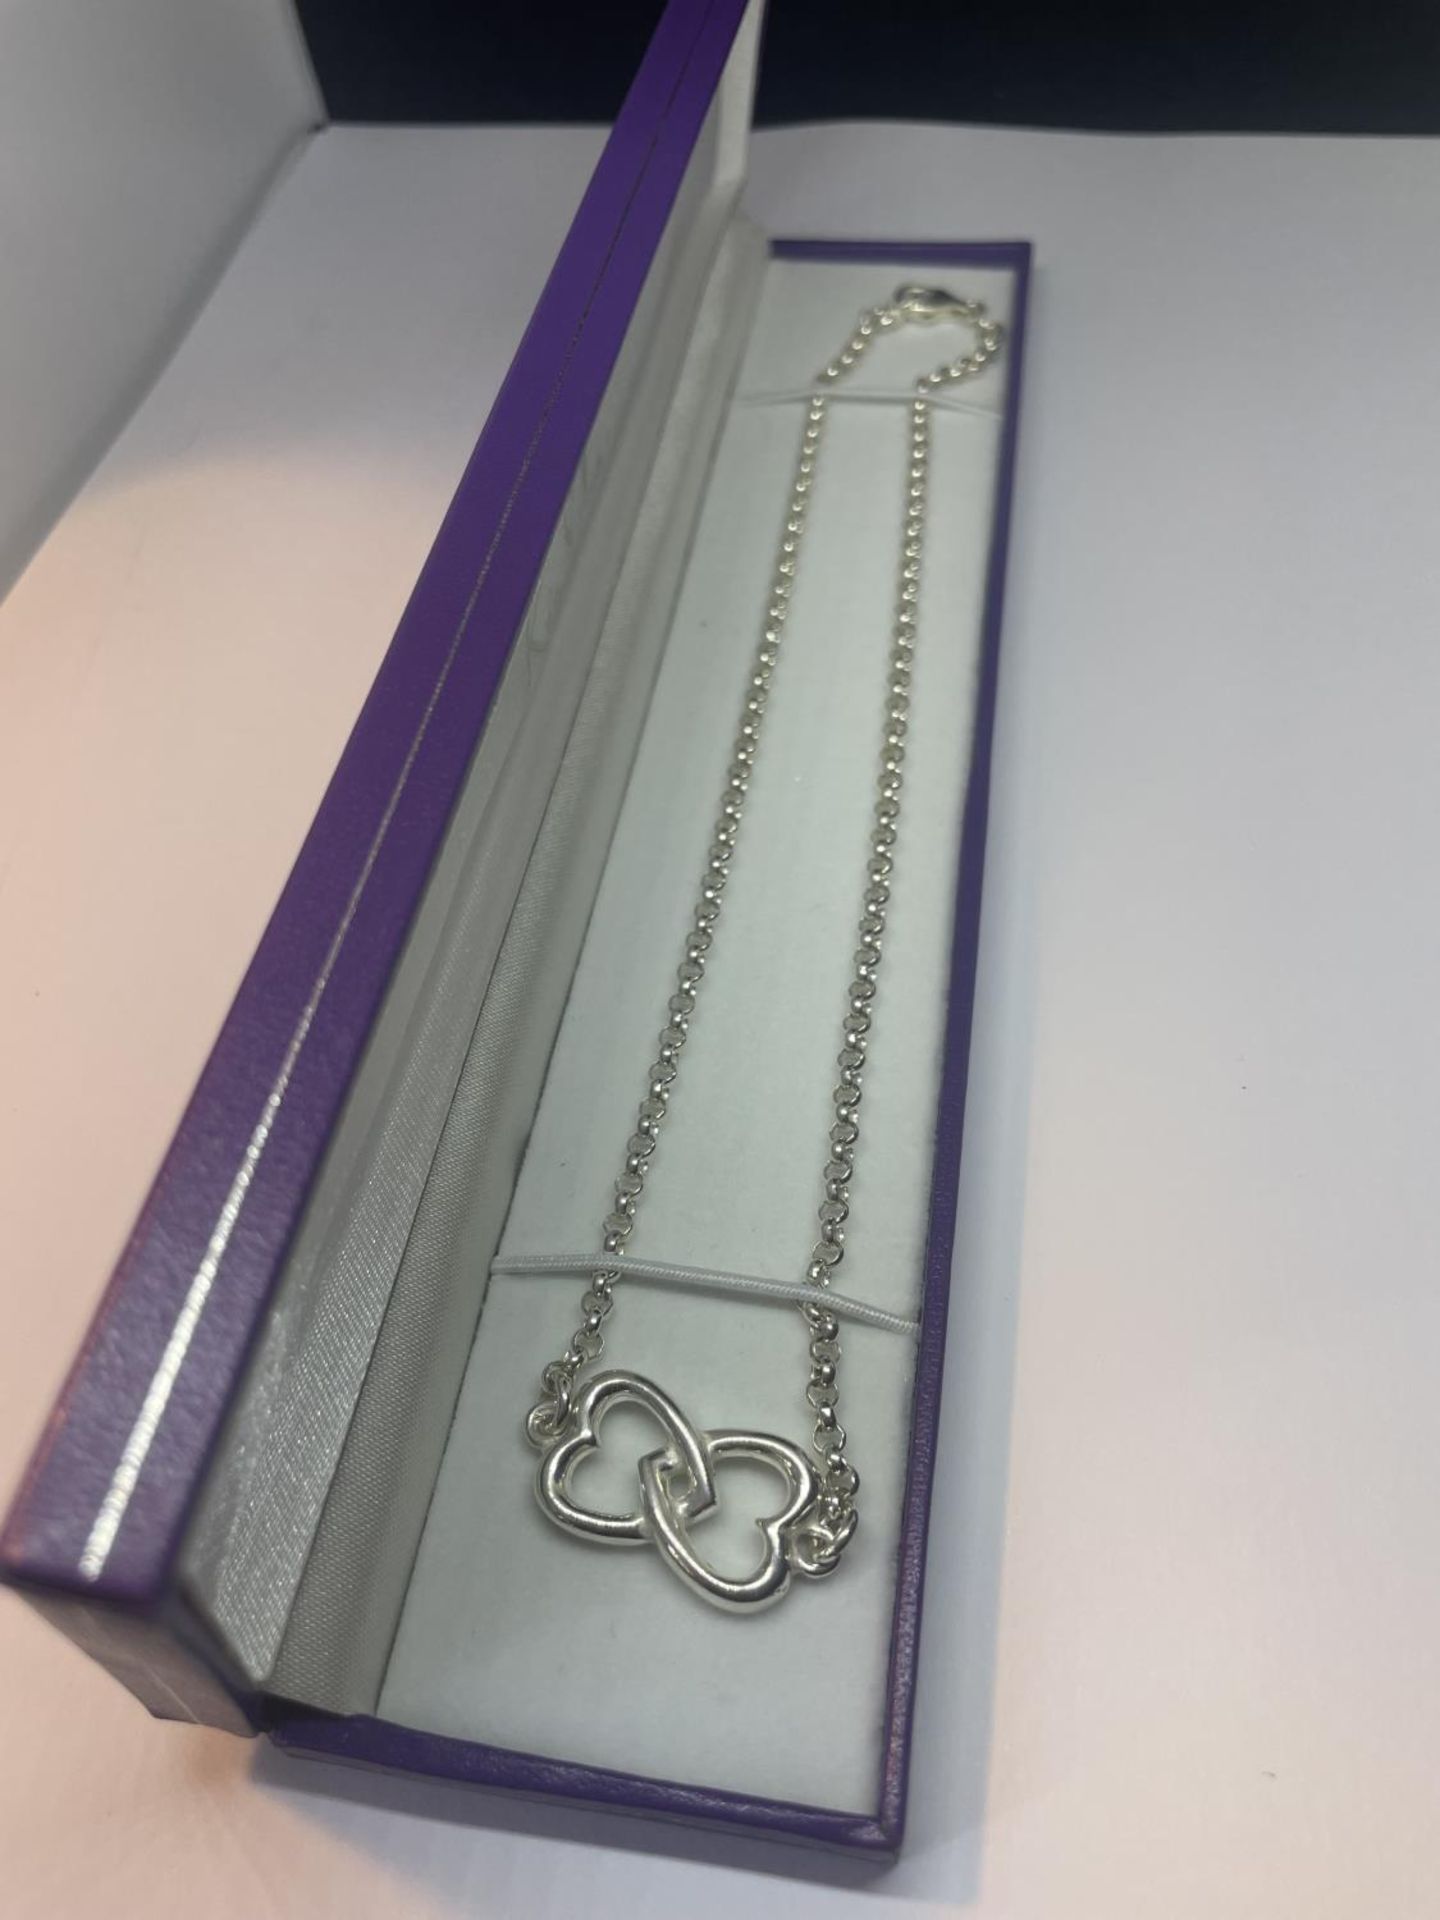 A MARKED SILVER NECKLACE WITH A DOUBLE HEART IN A PRESENTATION BOX